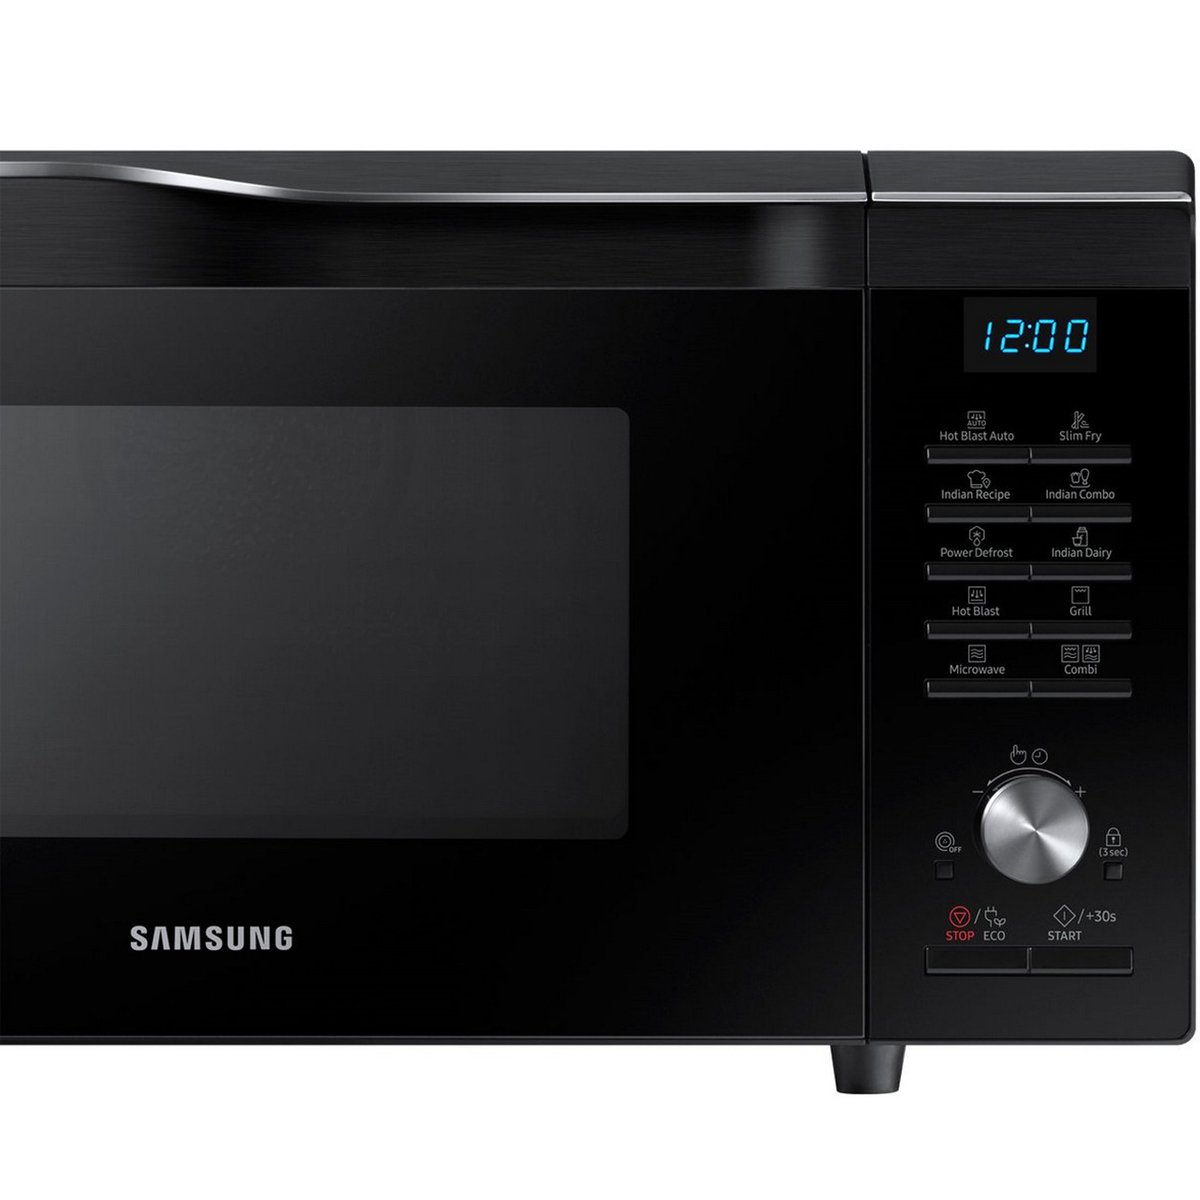 Samsung Convection Microwave Oven MC28M6055CK 28Ltr